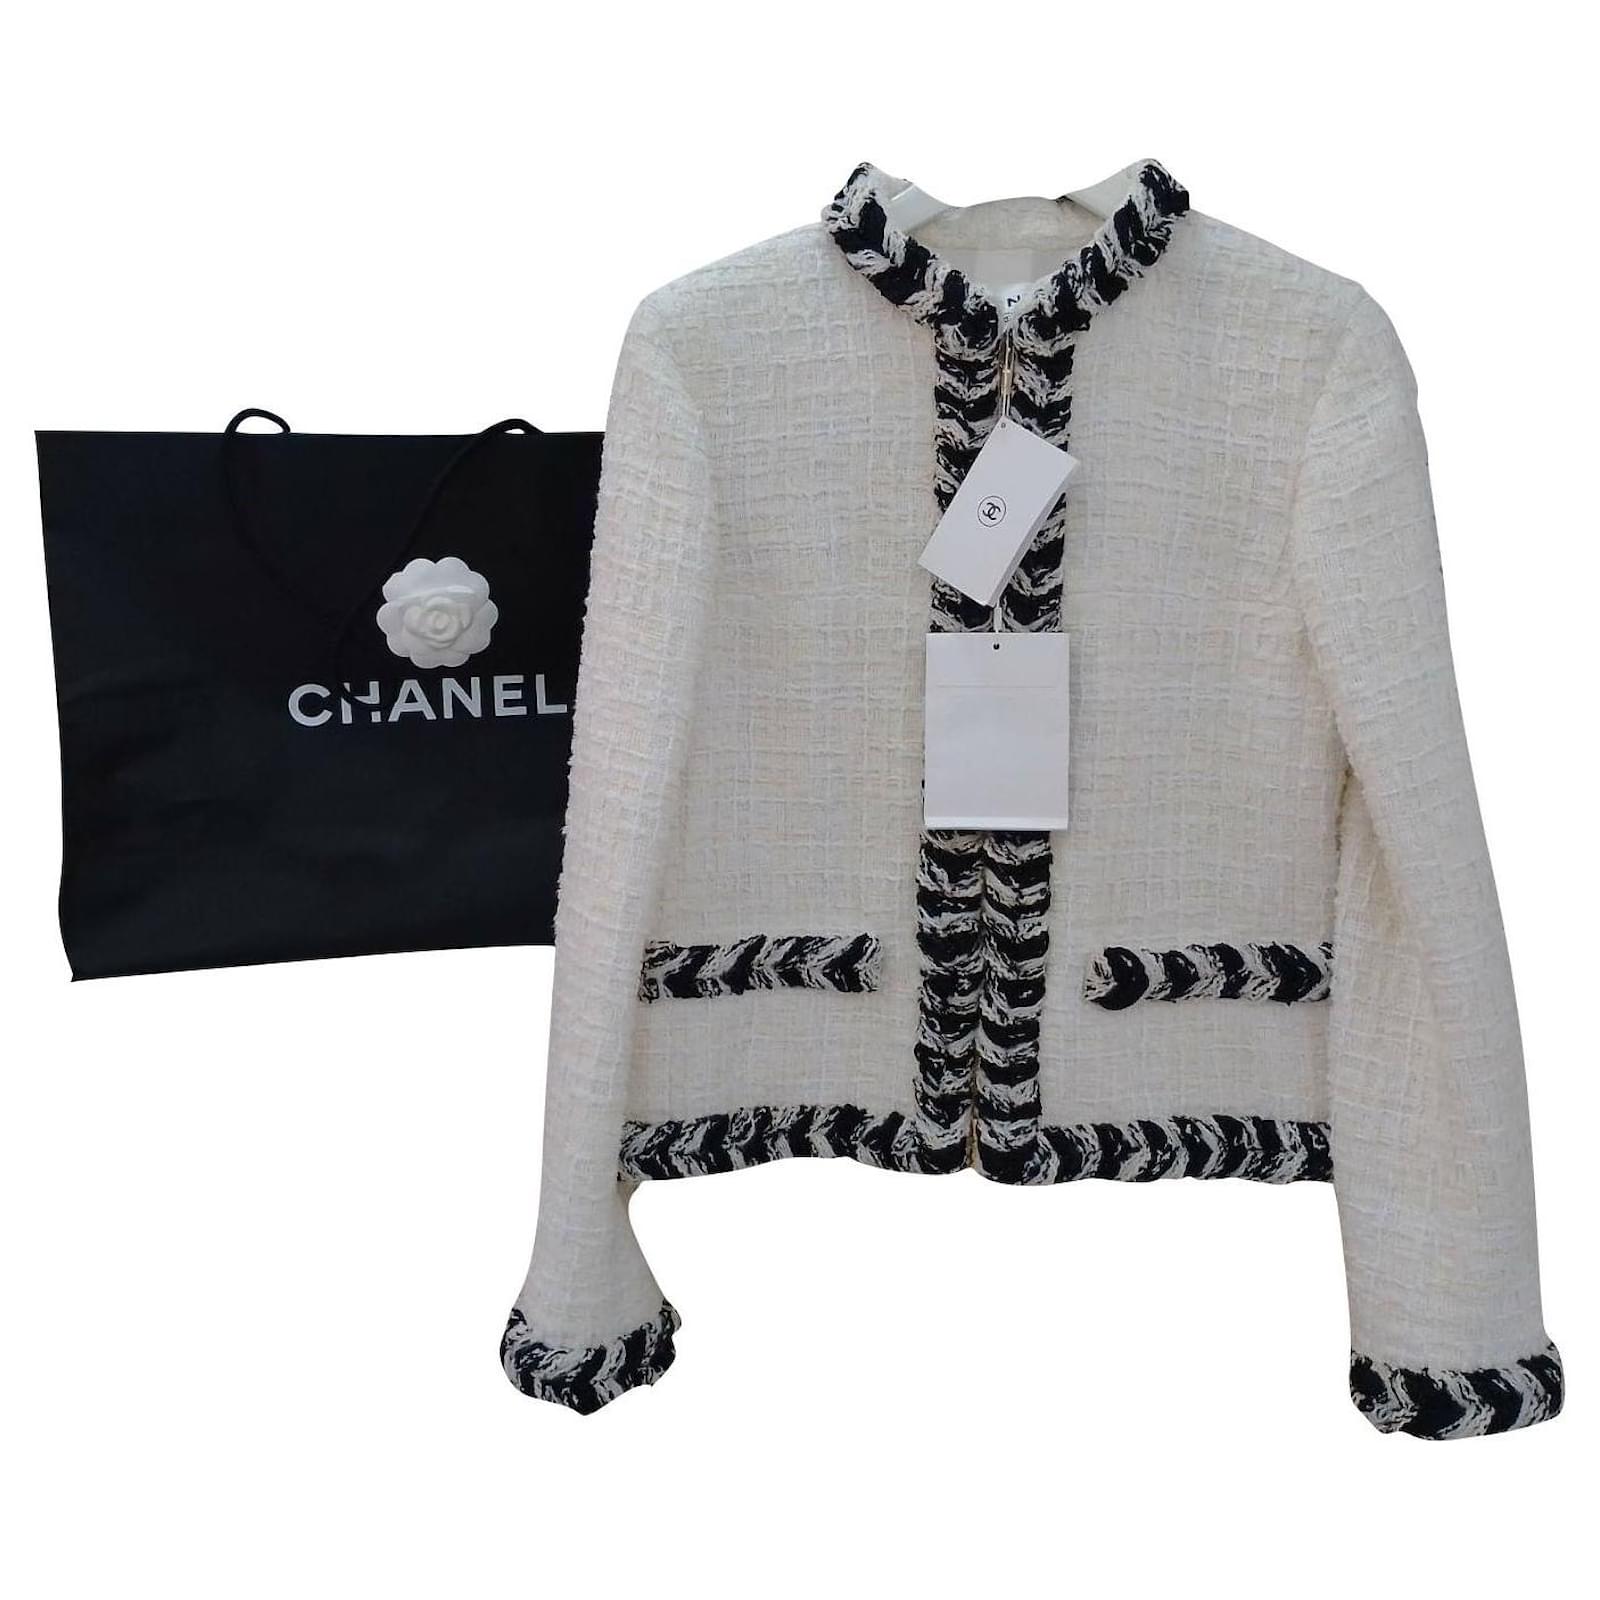 Jackets Chanel chanel#blazer#jacket#tuvit#with invoice#label#38#m#french